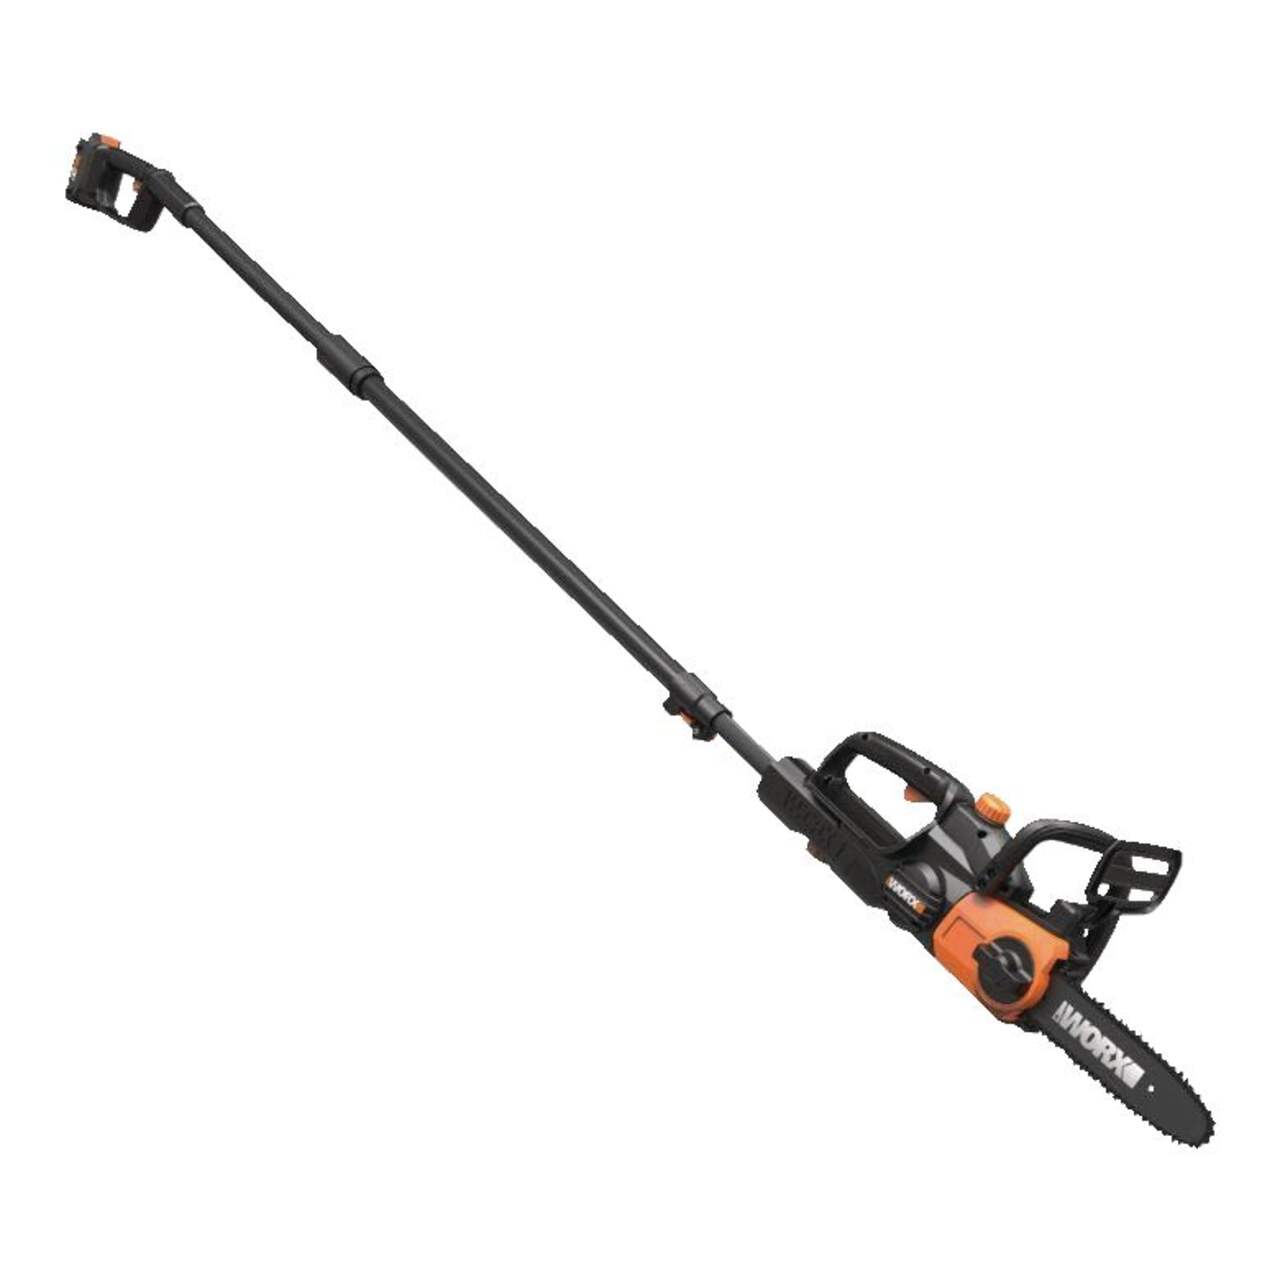 WORX WG323.1 20V Power Share™ 2-in-1 Cordless Polesaw, with Auto